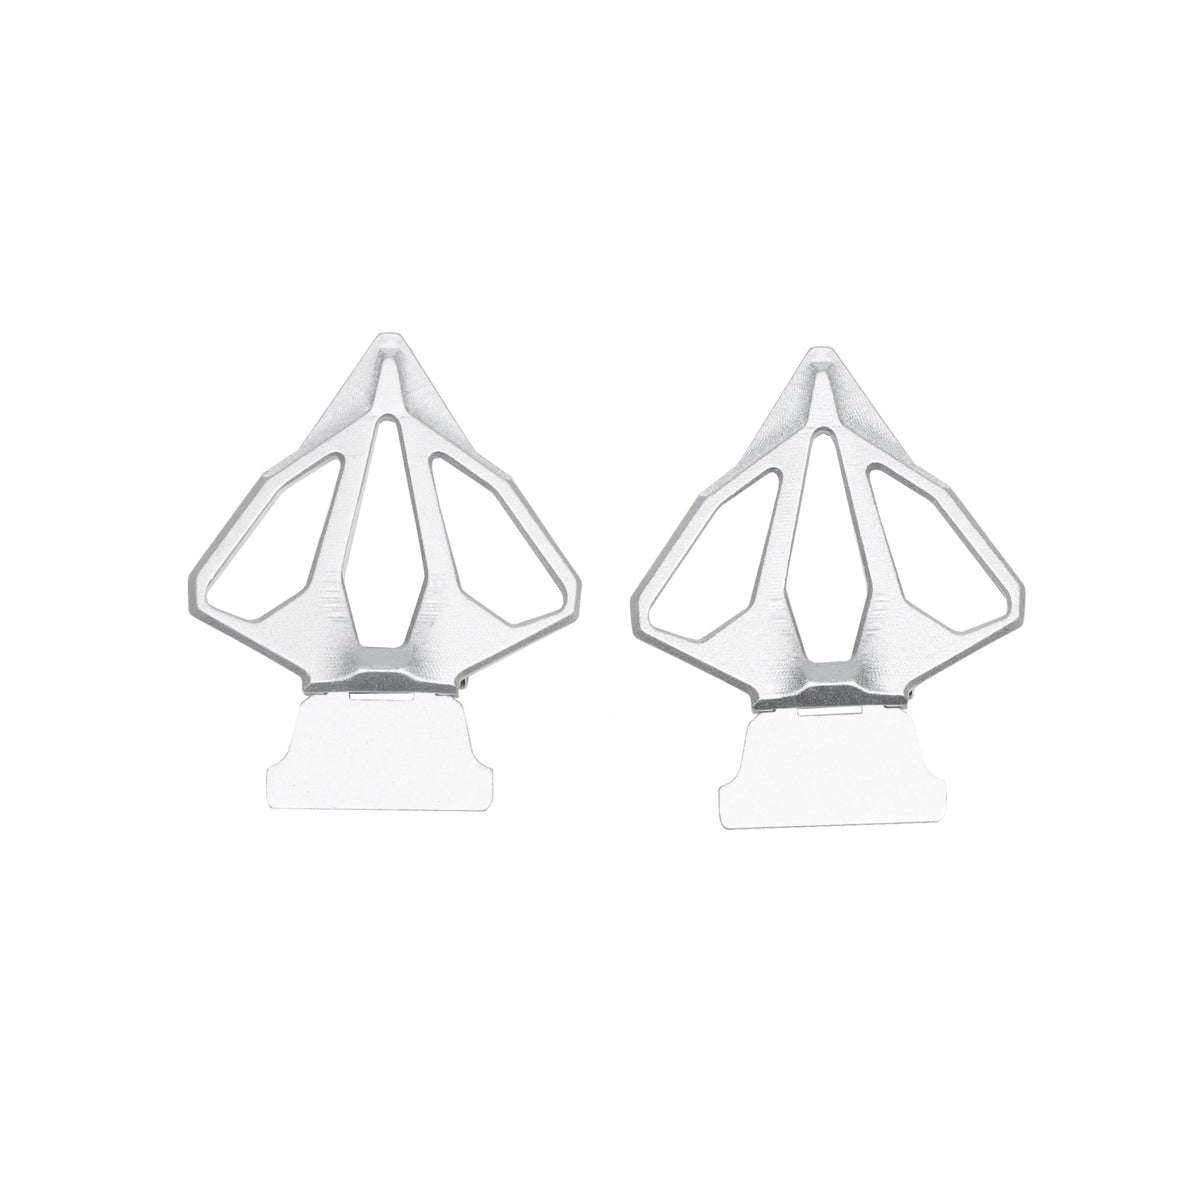 Evo Replacement Fin Set for Speed feed | Color: Silver | HK Army